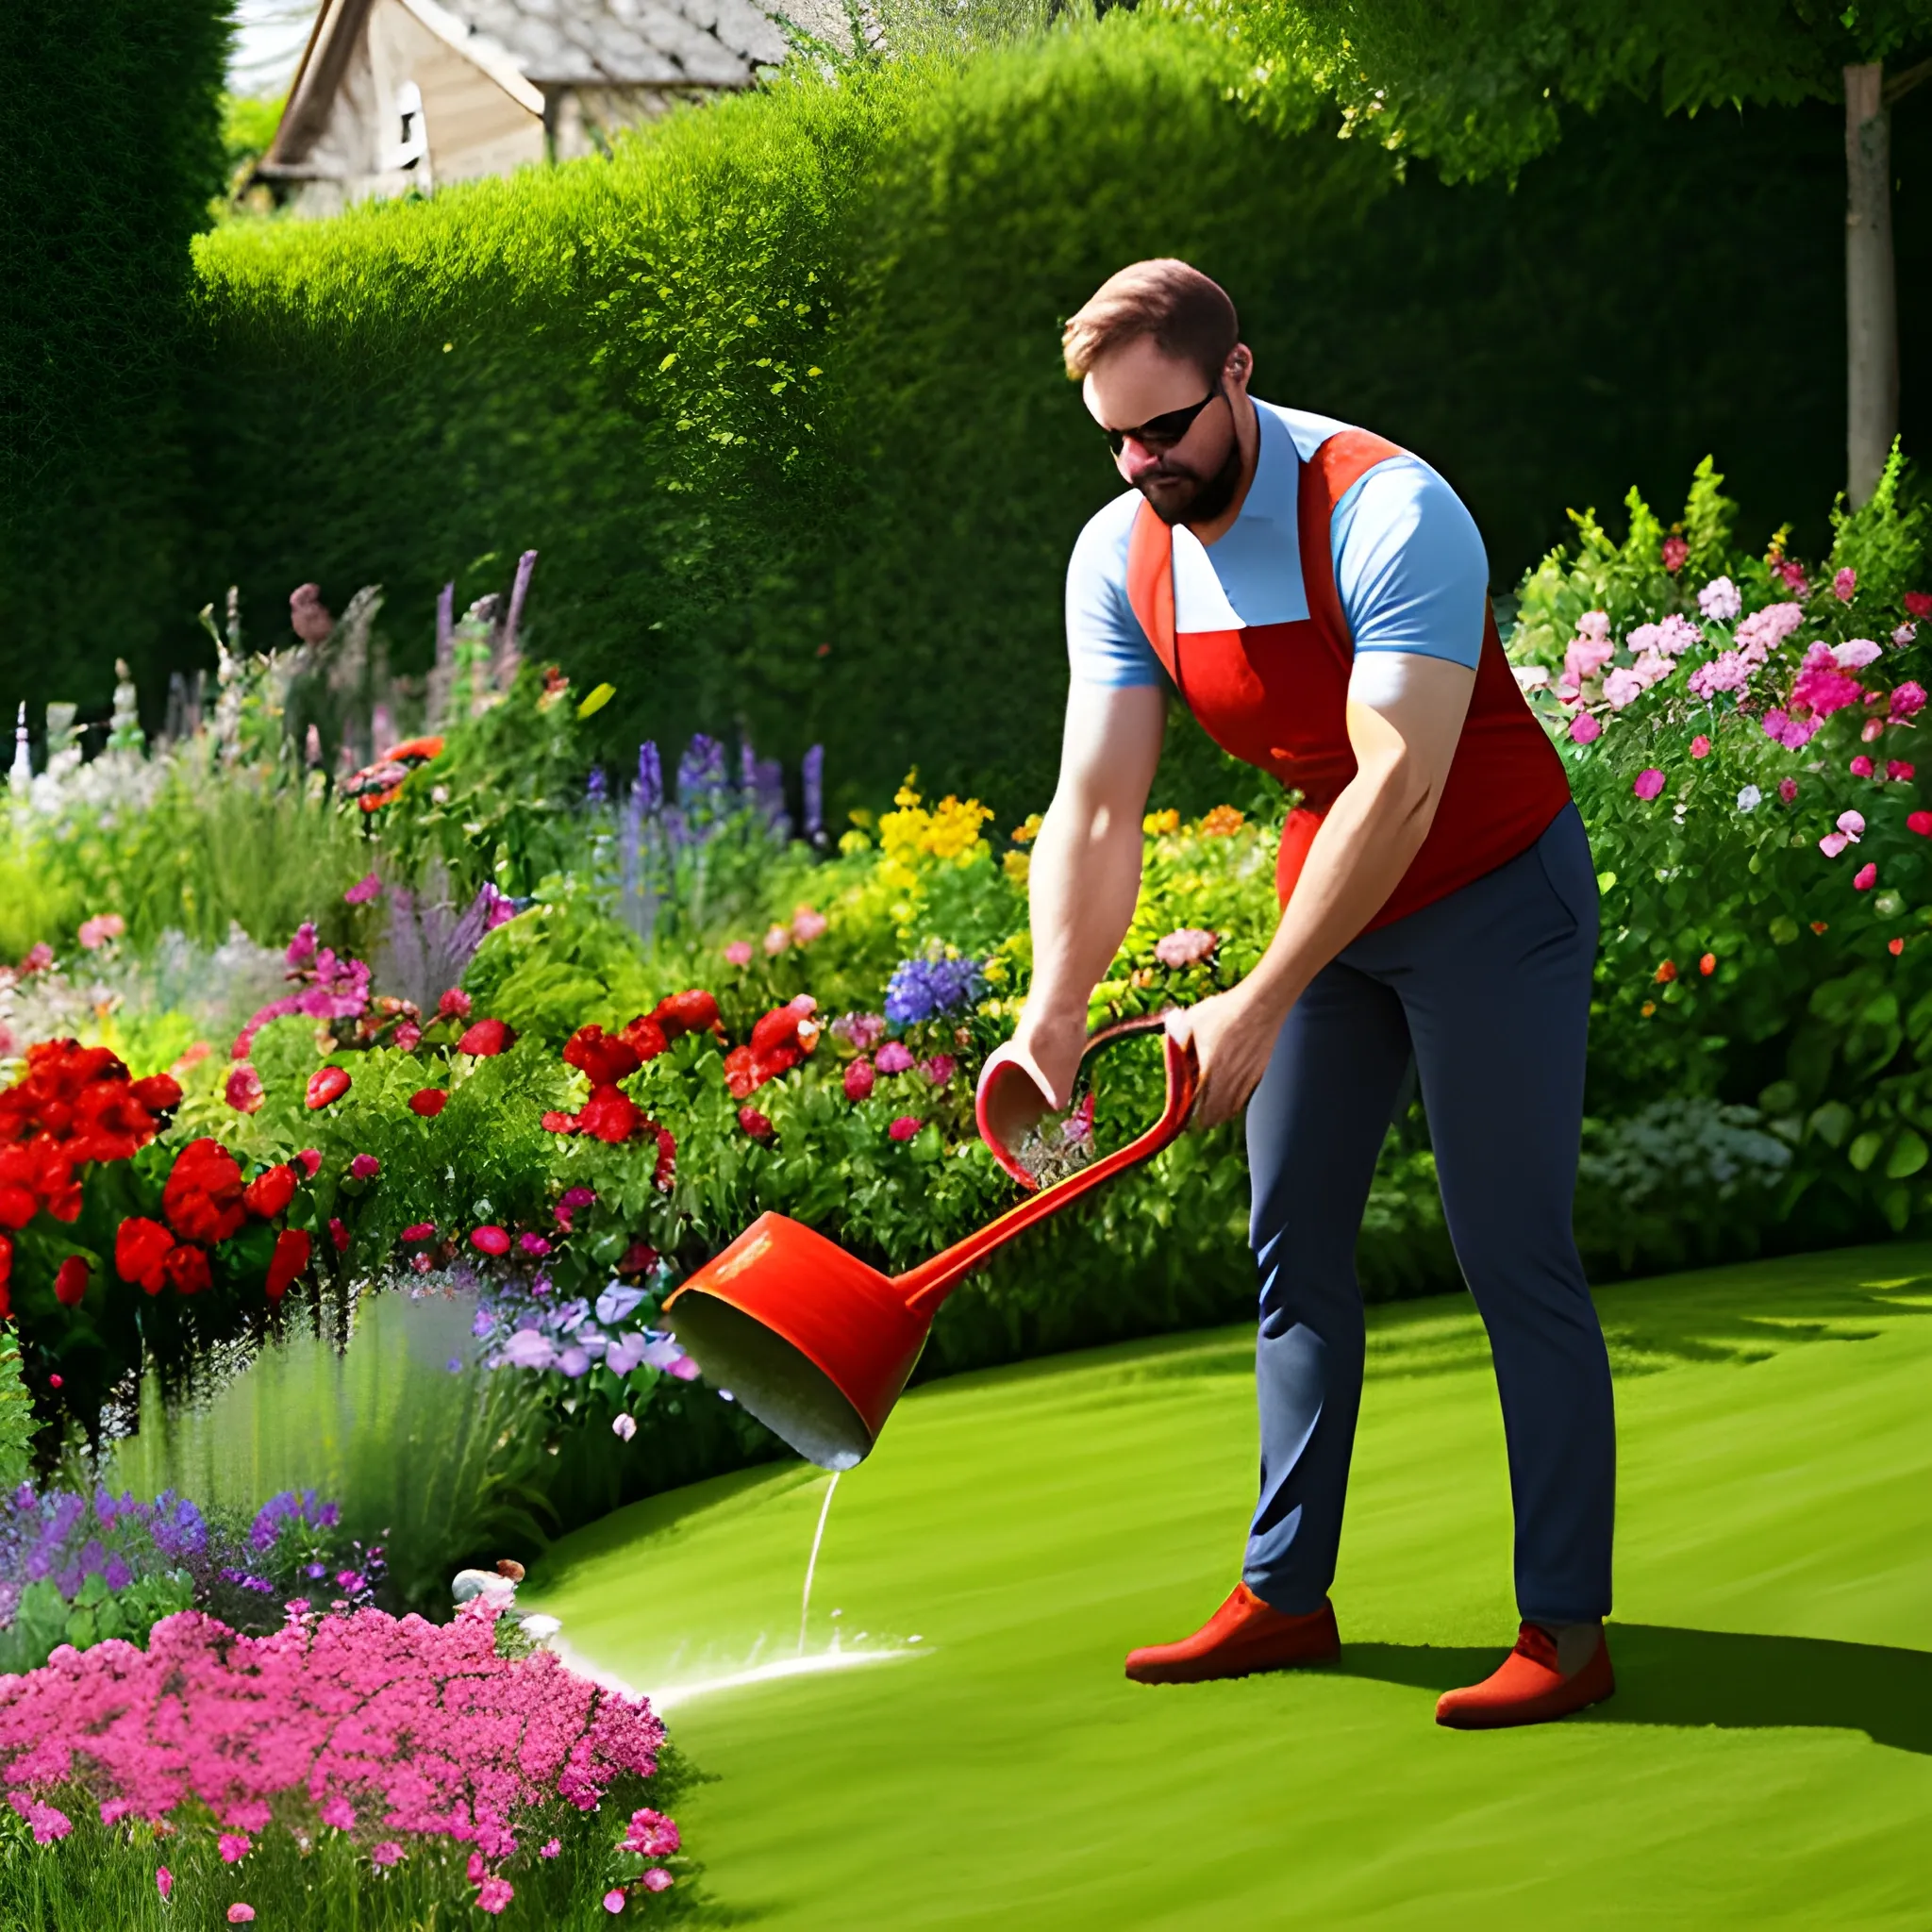 Child gardening. Little boy with red watering can in blooming sunny garden. Kids help in backyard. Summer outdoor fun. Kid taking care of plants and flowers.